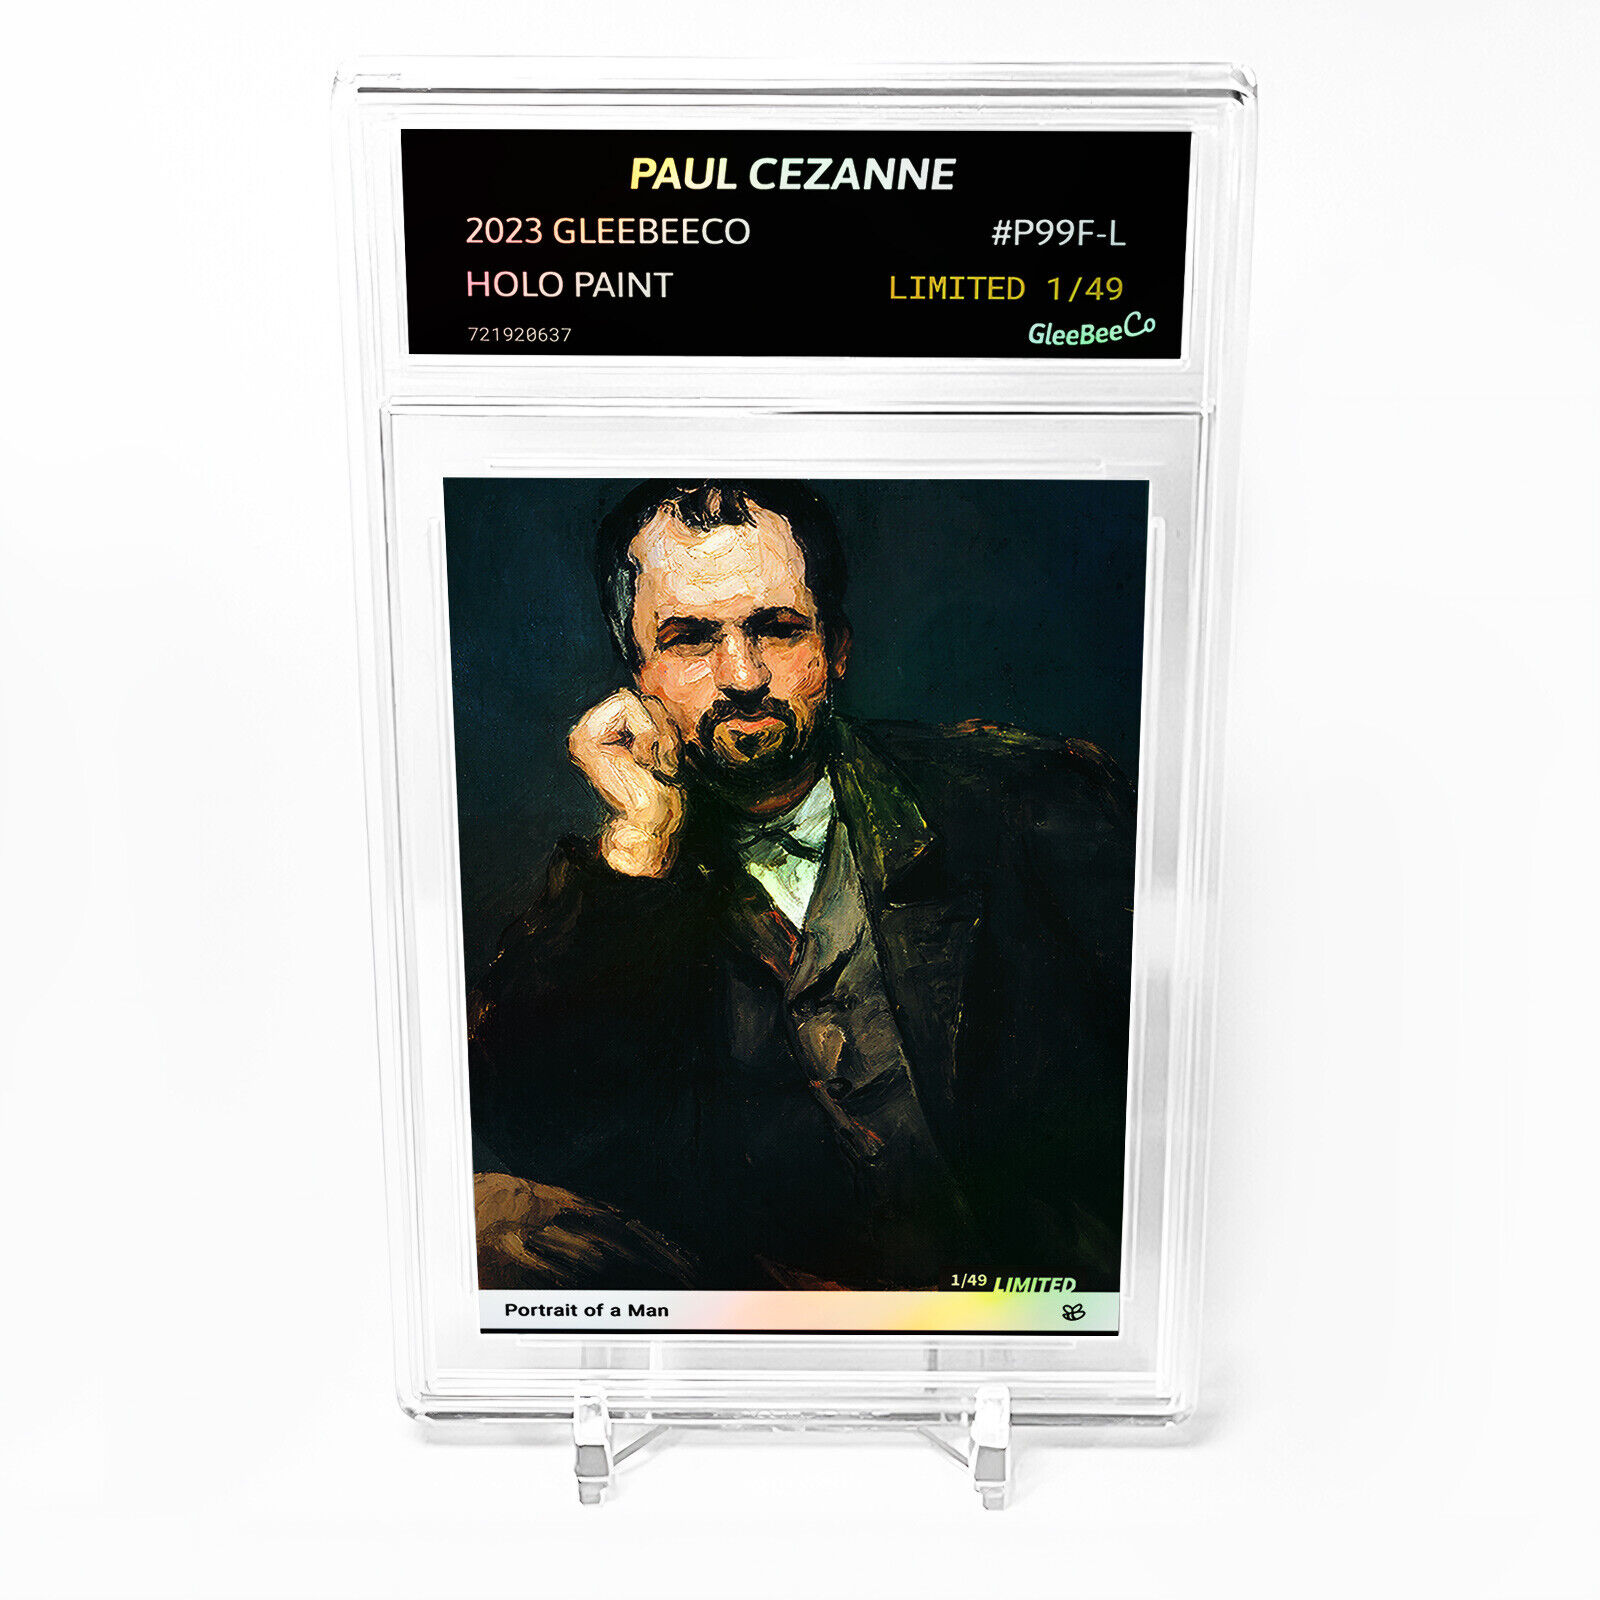 PORTRAIT OF A MAN (Paul Cezanne) GleeBeeCo Card #P99F-L - Limited Edition /49